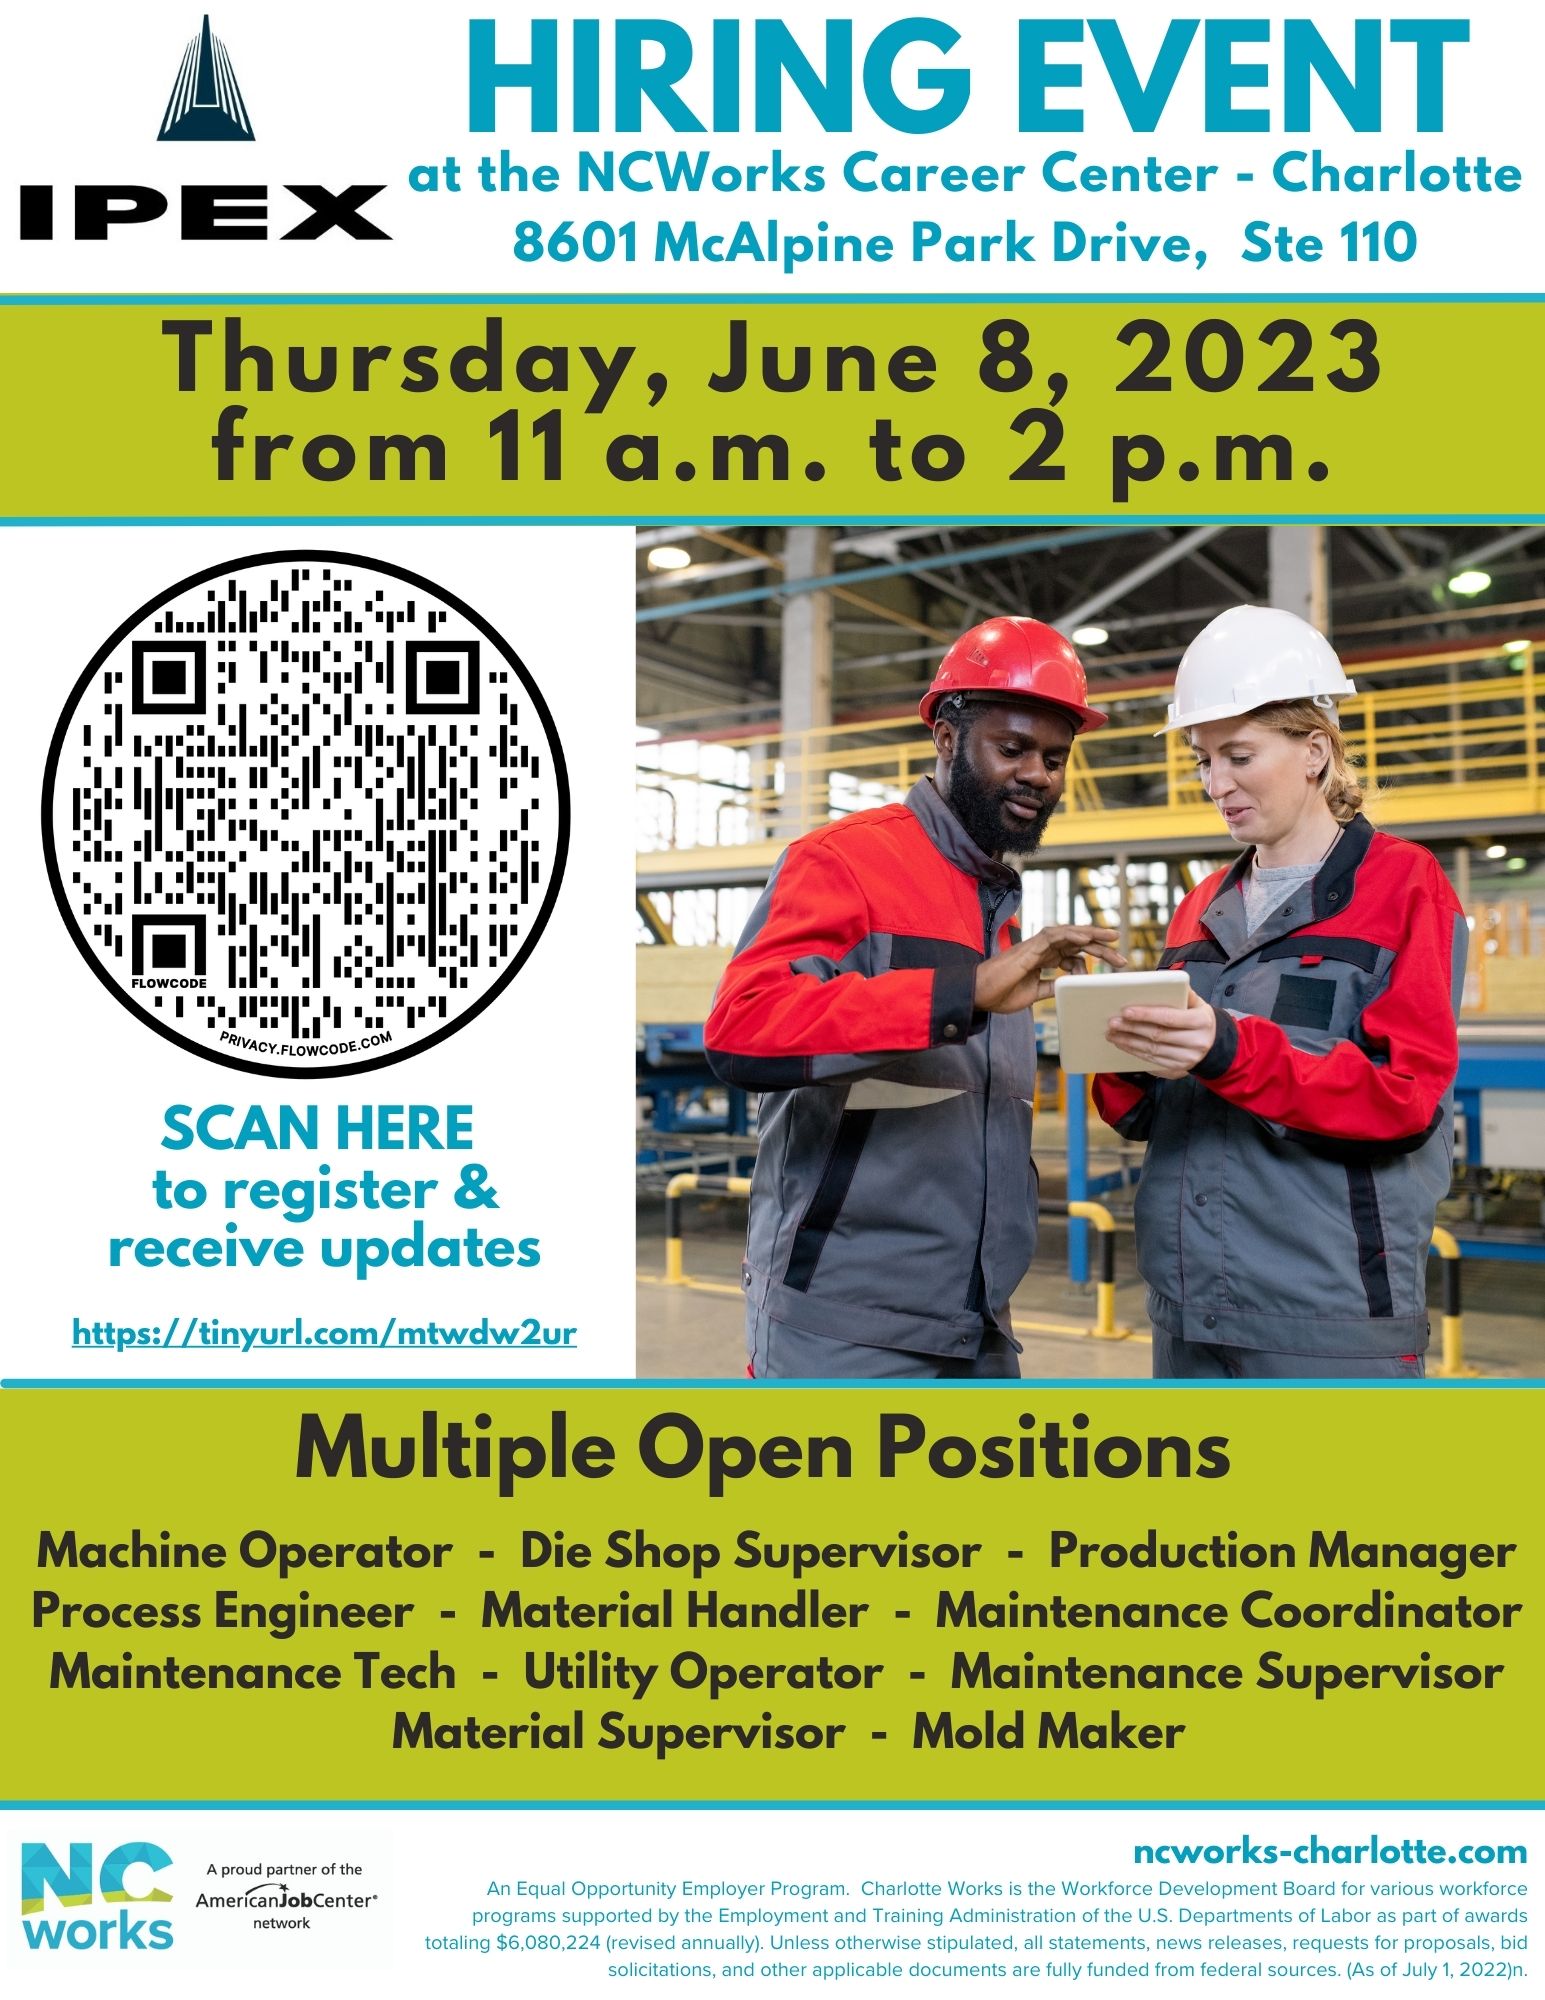 IPEX hiring event flyer for June 8th at 11 AM at the NCWorks Career Center.